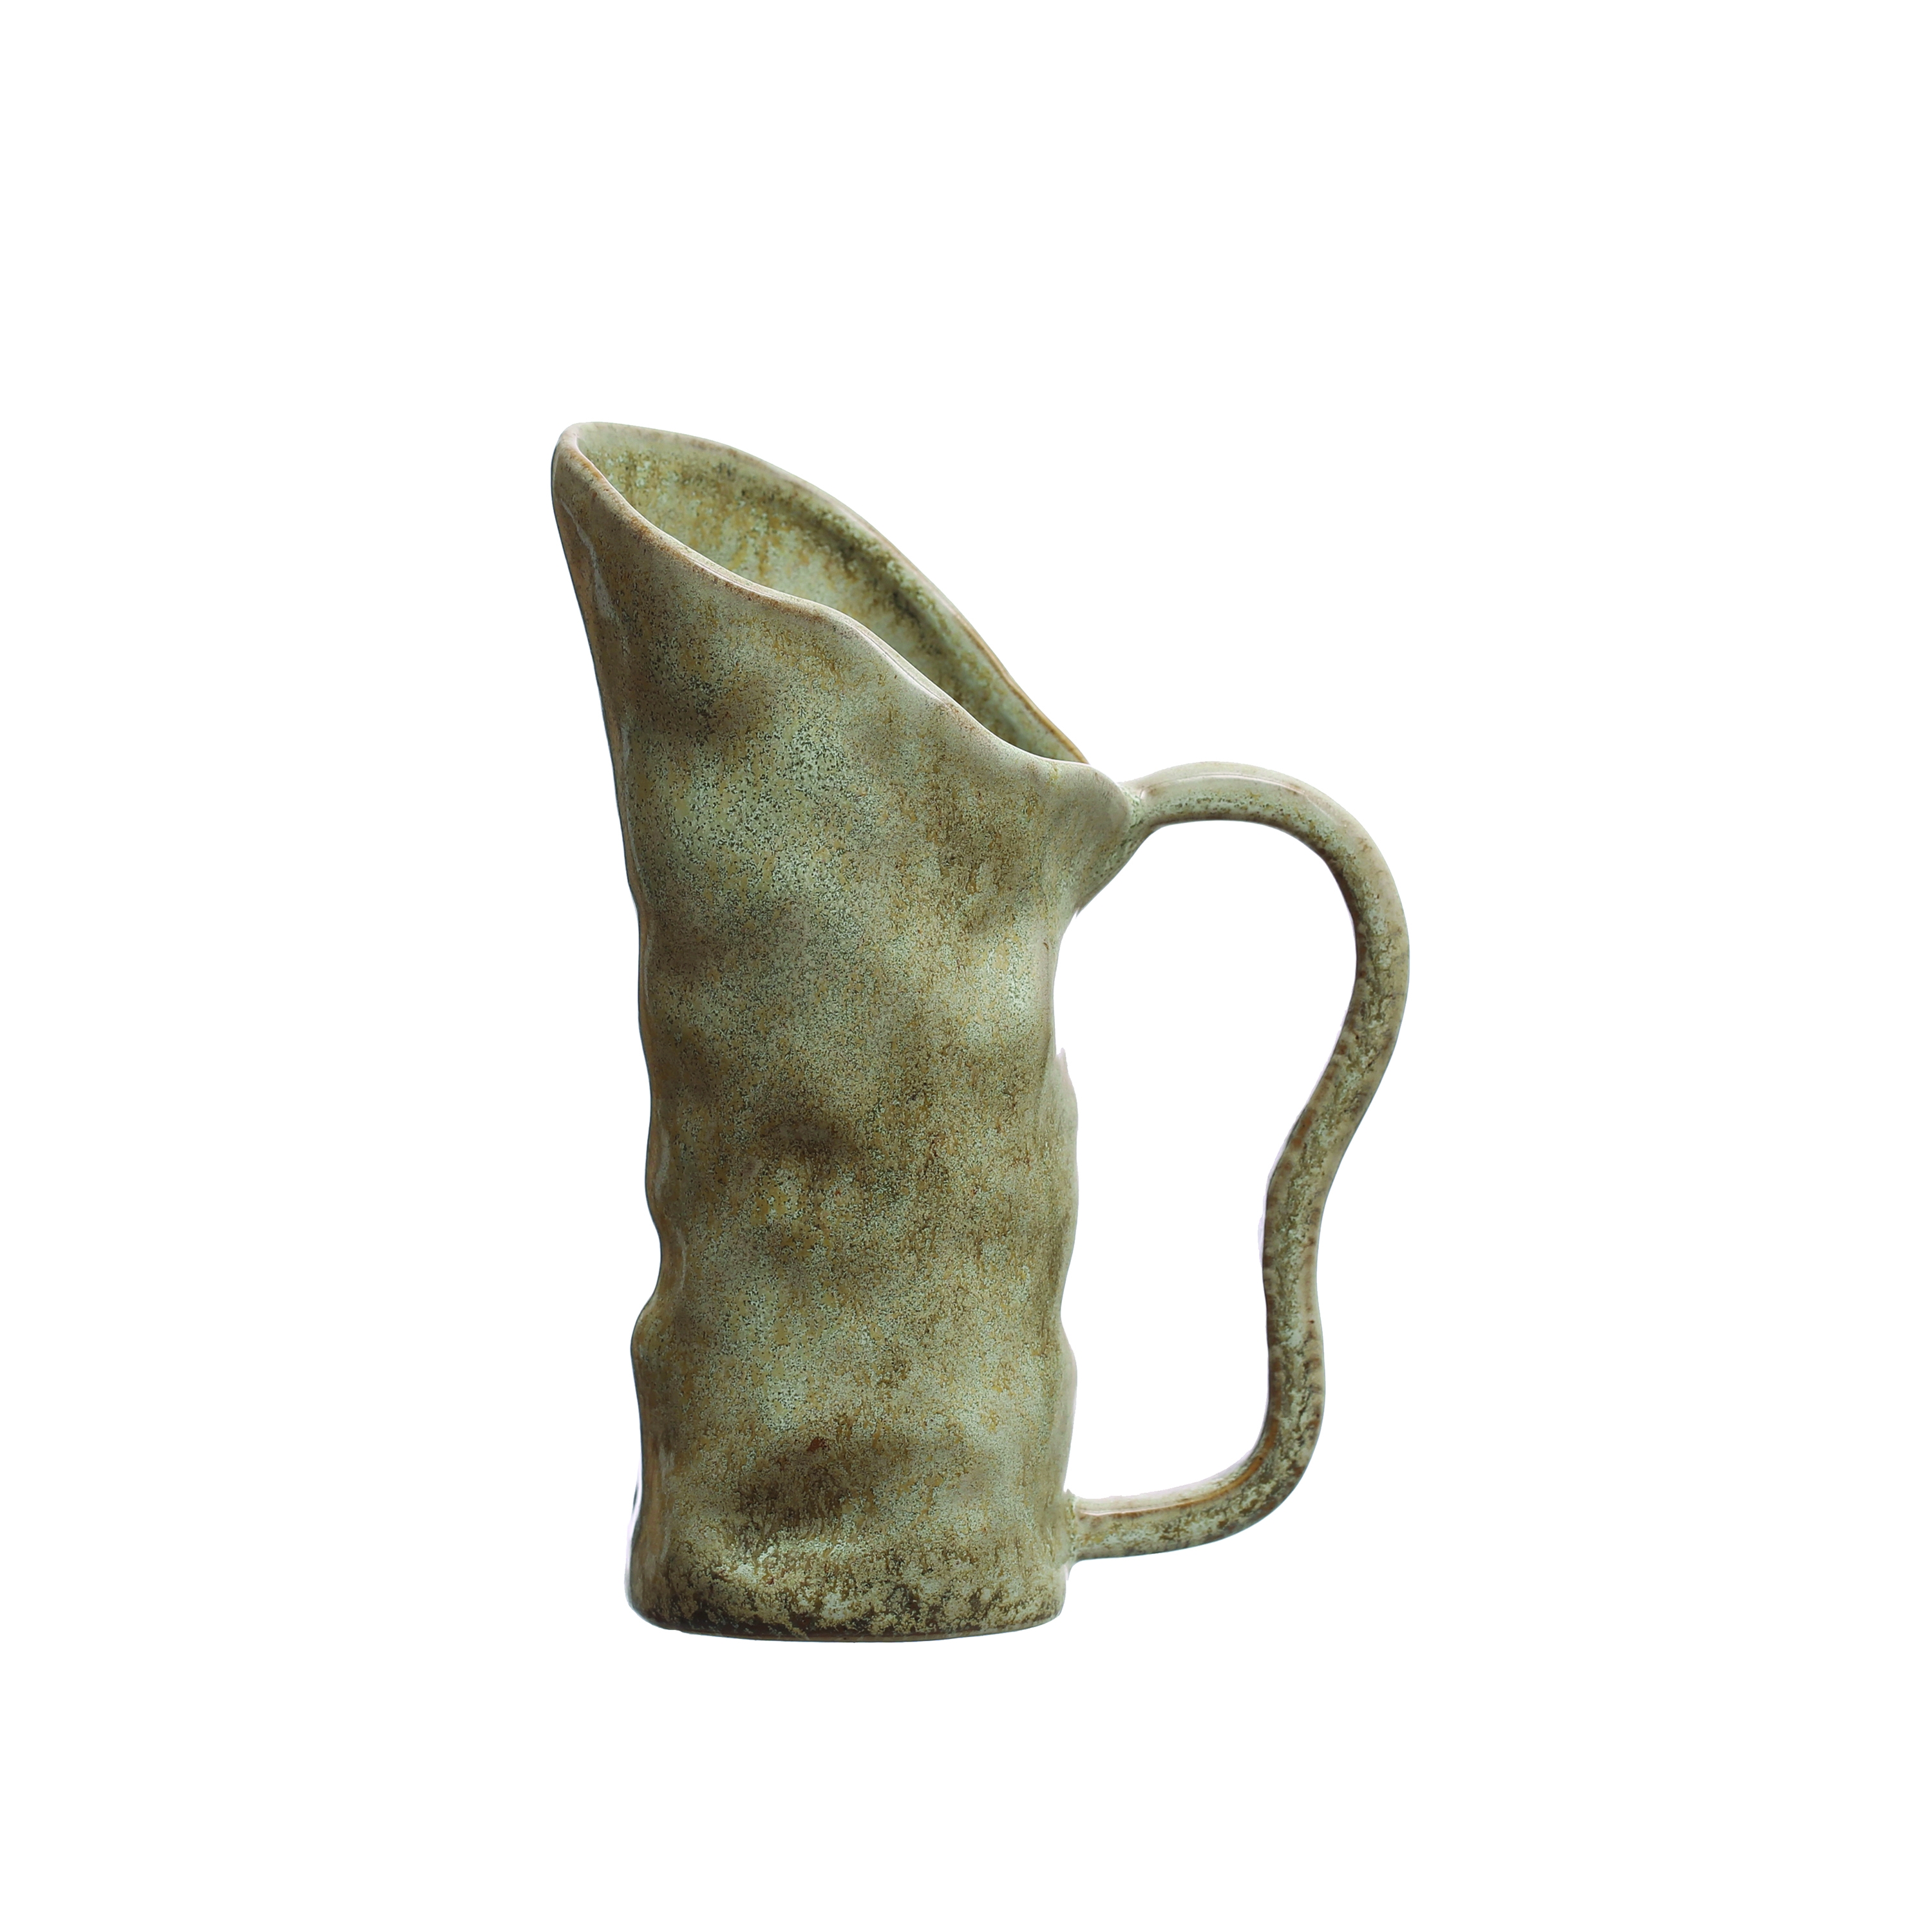 7.5 Inches 12-Ounce Stoneware Organic Shaped Pitcher in Reactive Glaze, Green - Image 0